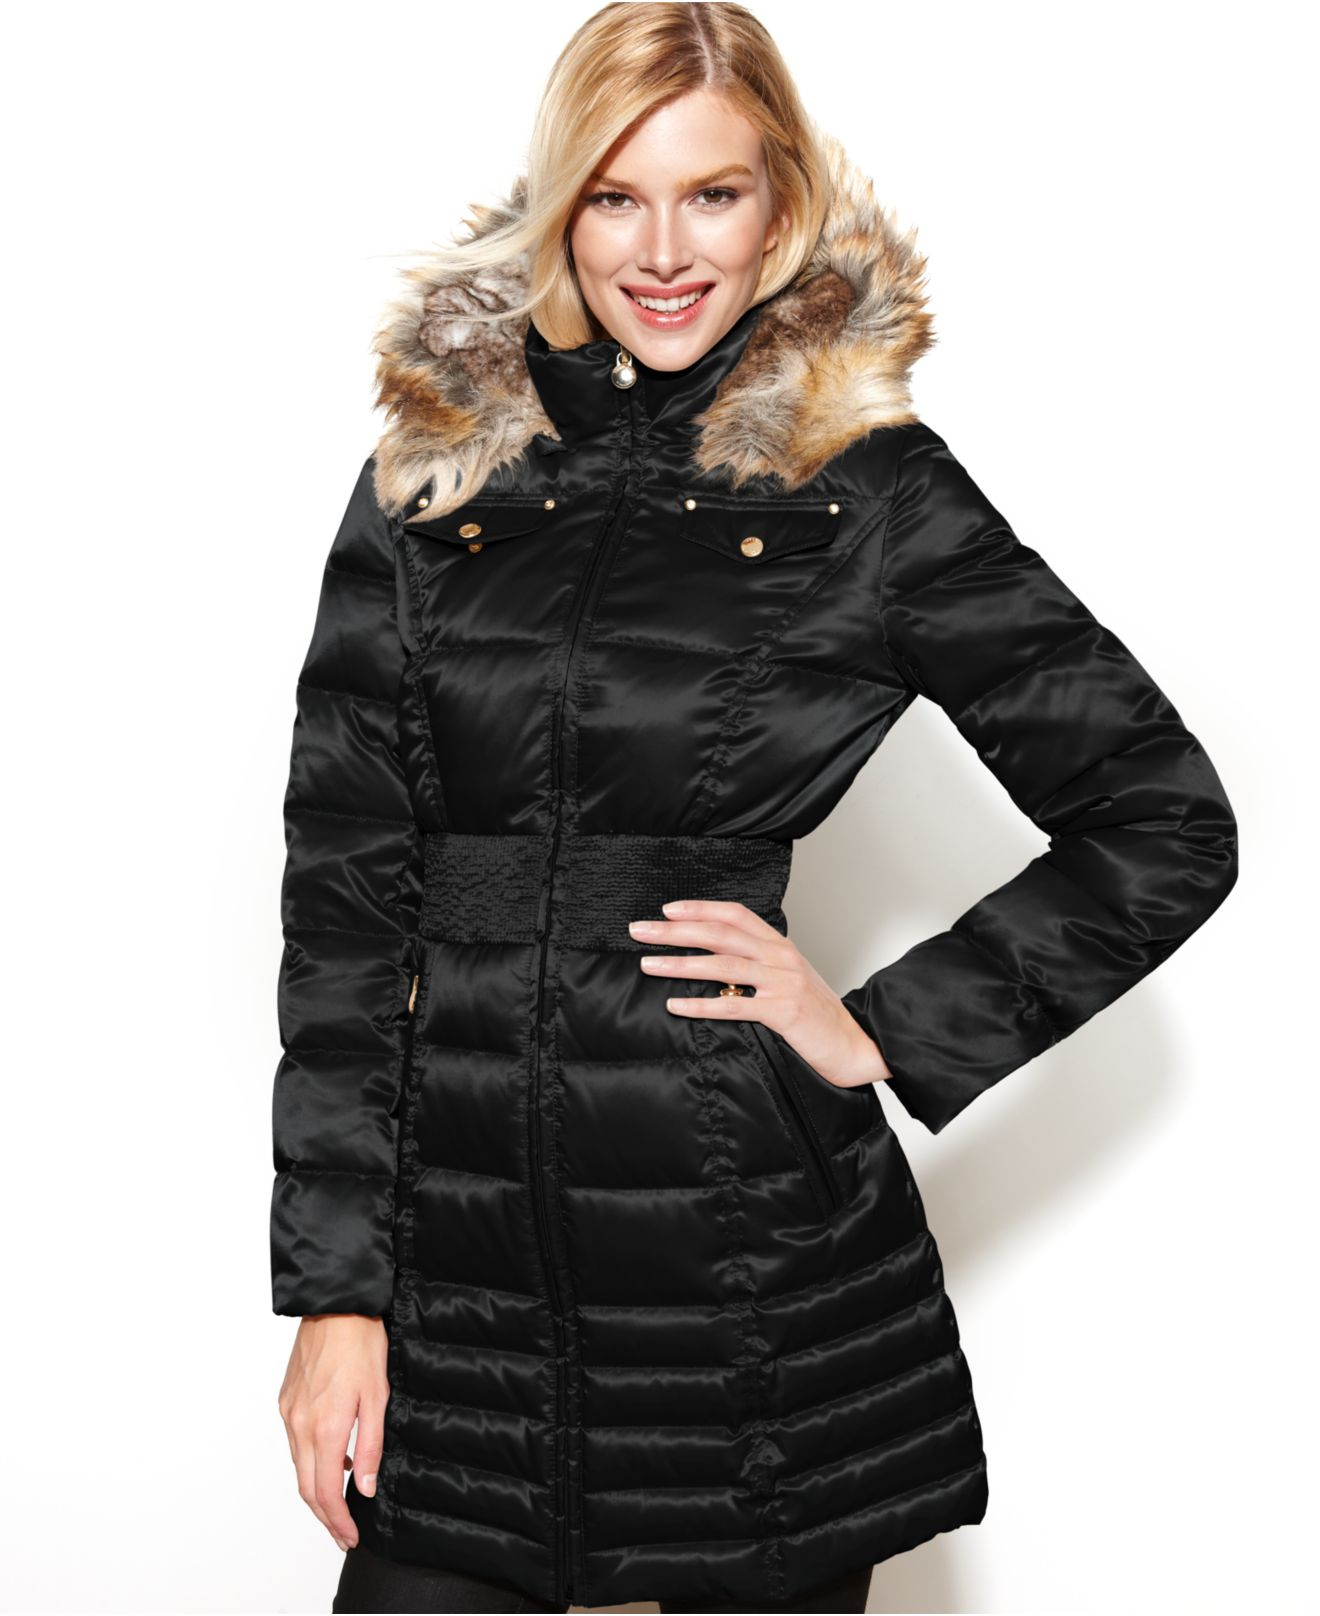 Lyst - Laundry By Shelli Segal Petite Hooded Faux-Fur-Trim Down Puffer ...